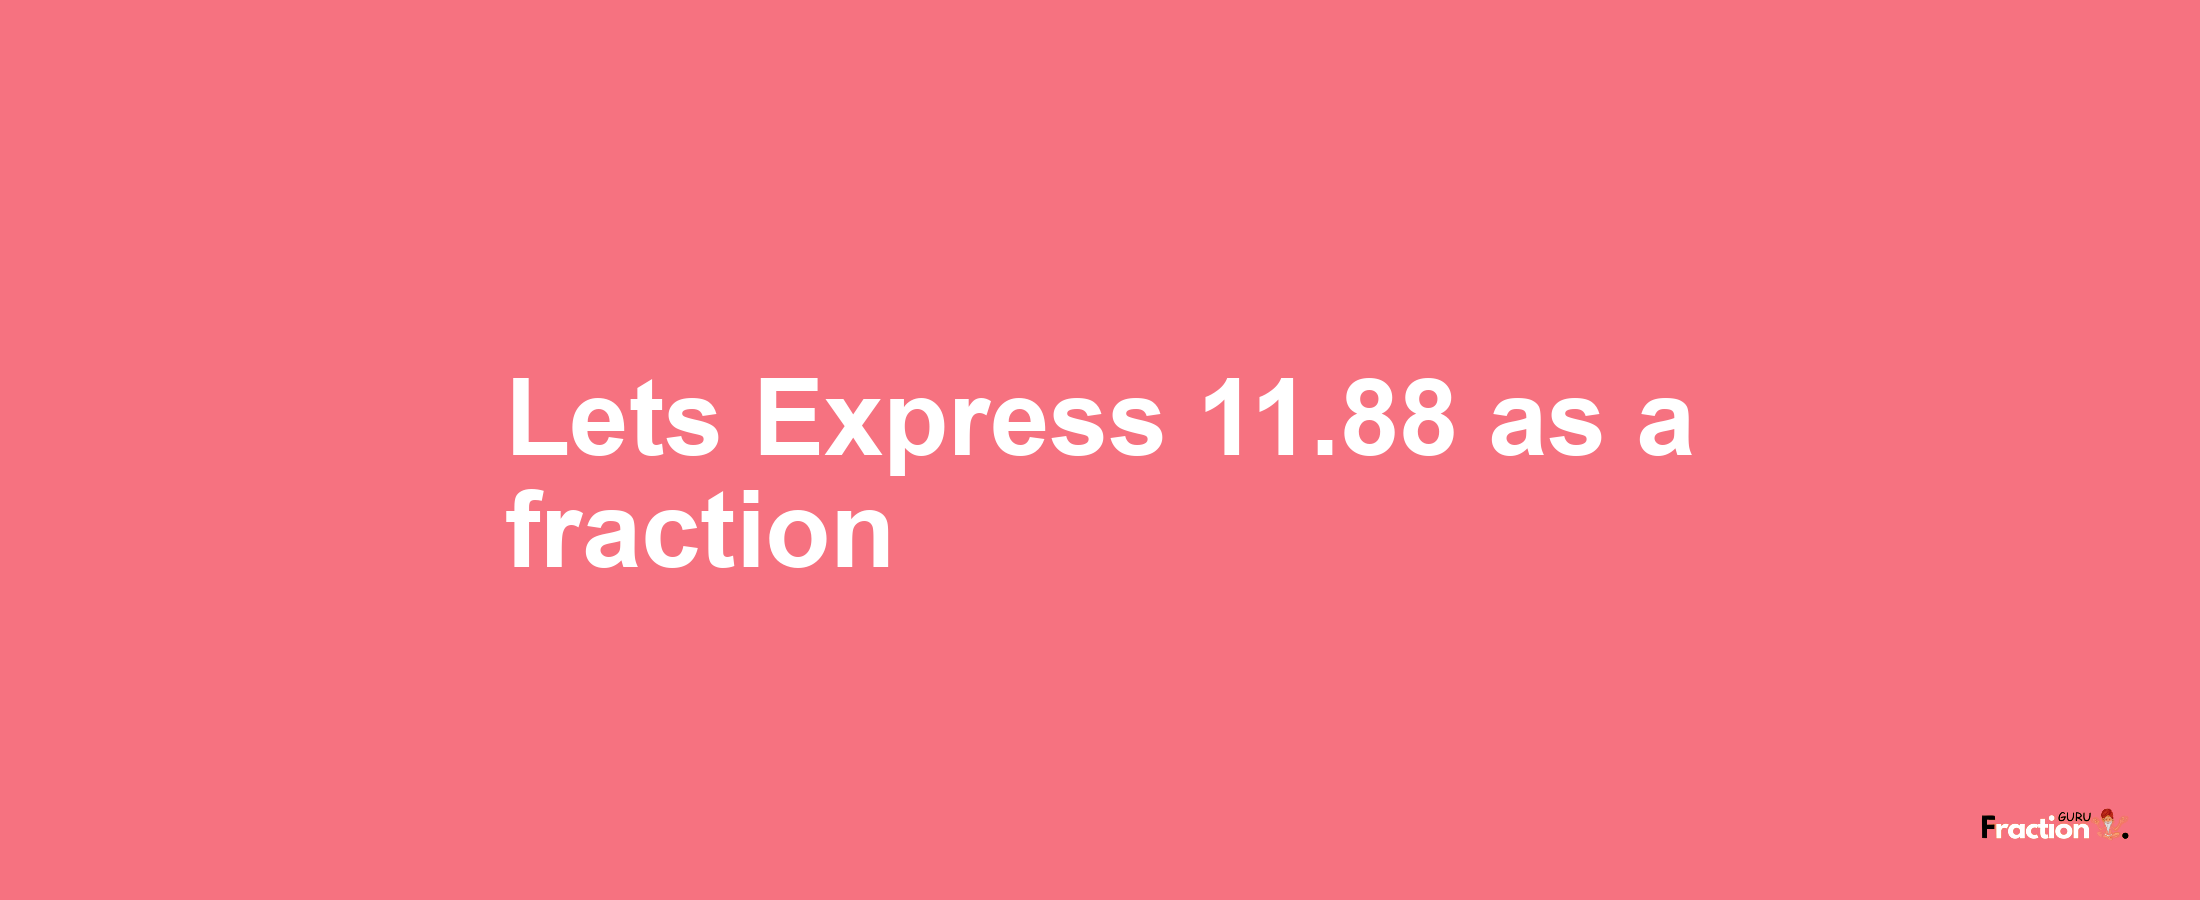 Lets Express 11.88 as afraction